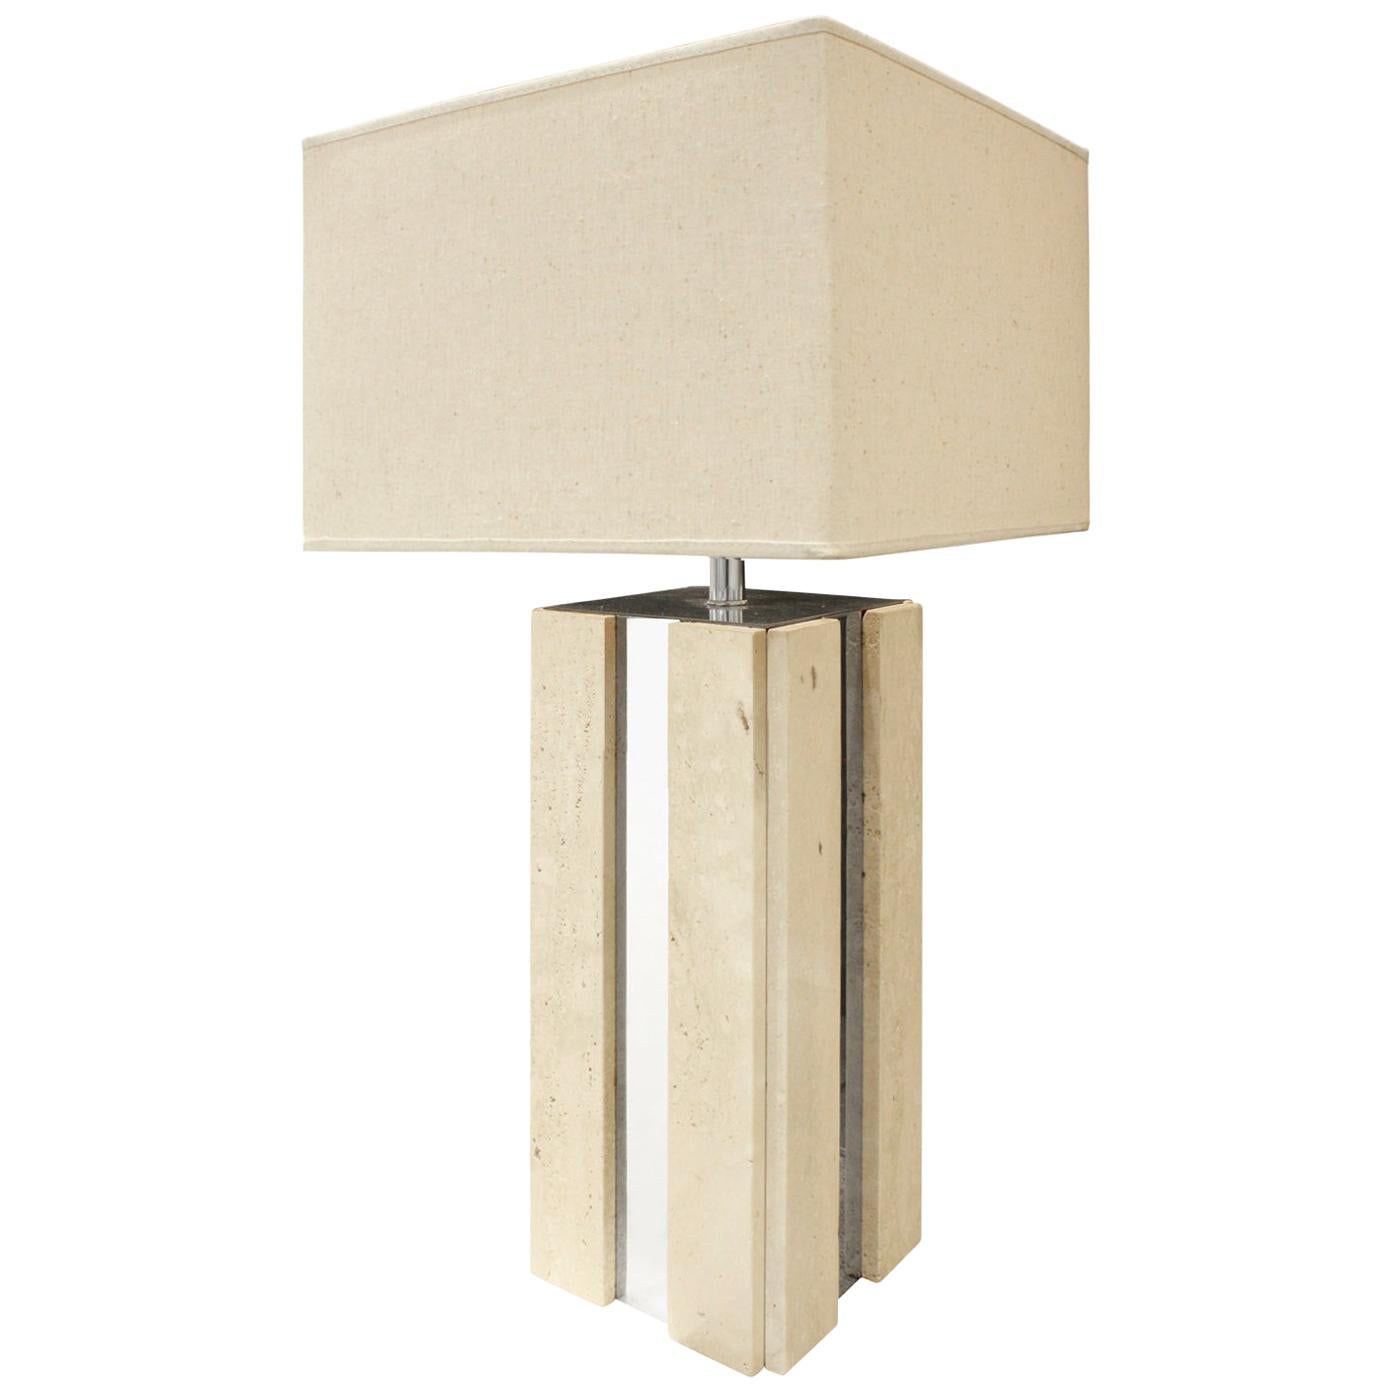 Exceptional Traventine Table Lamp with Chrome Accents, 1960s For Sale